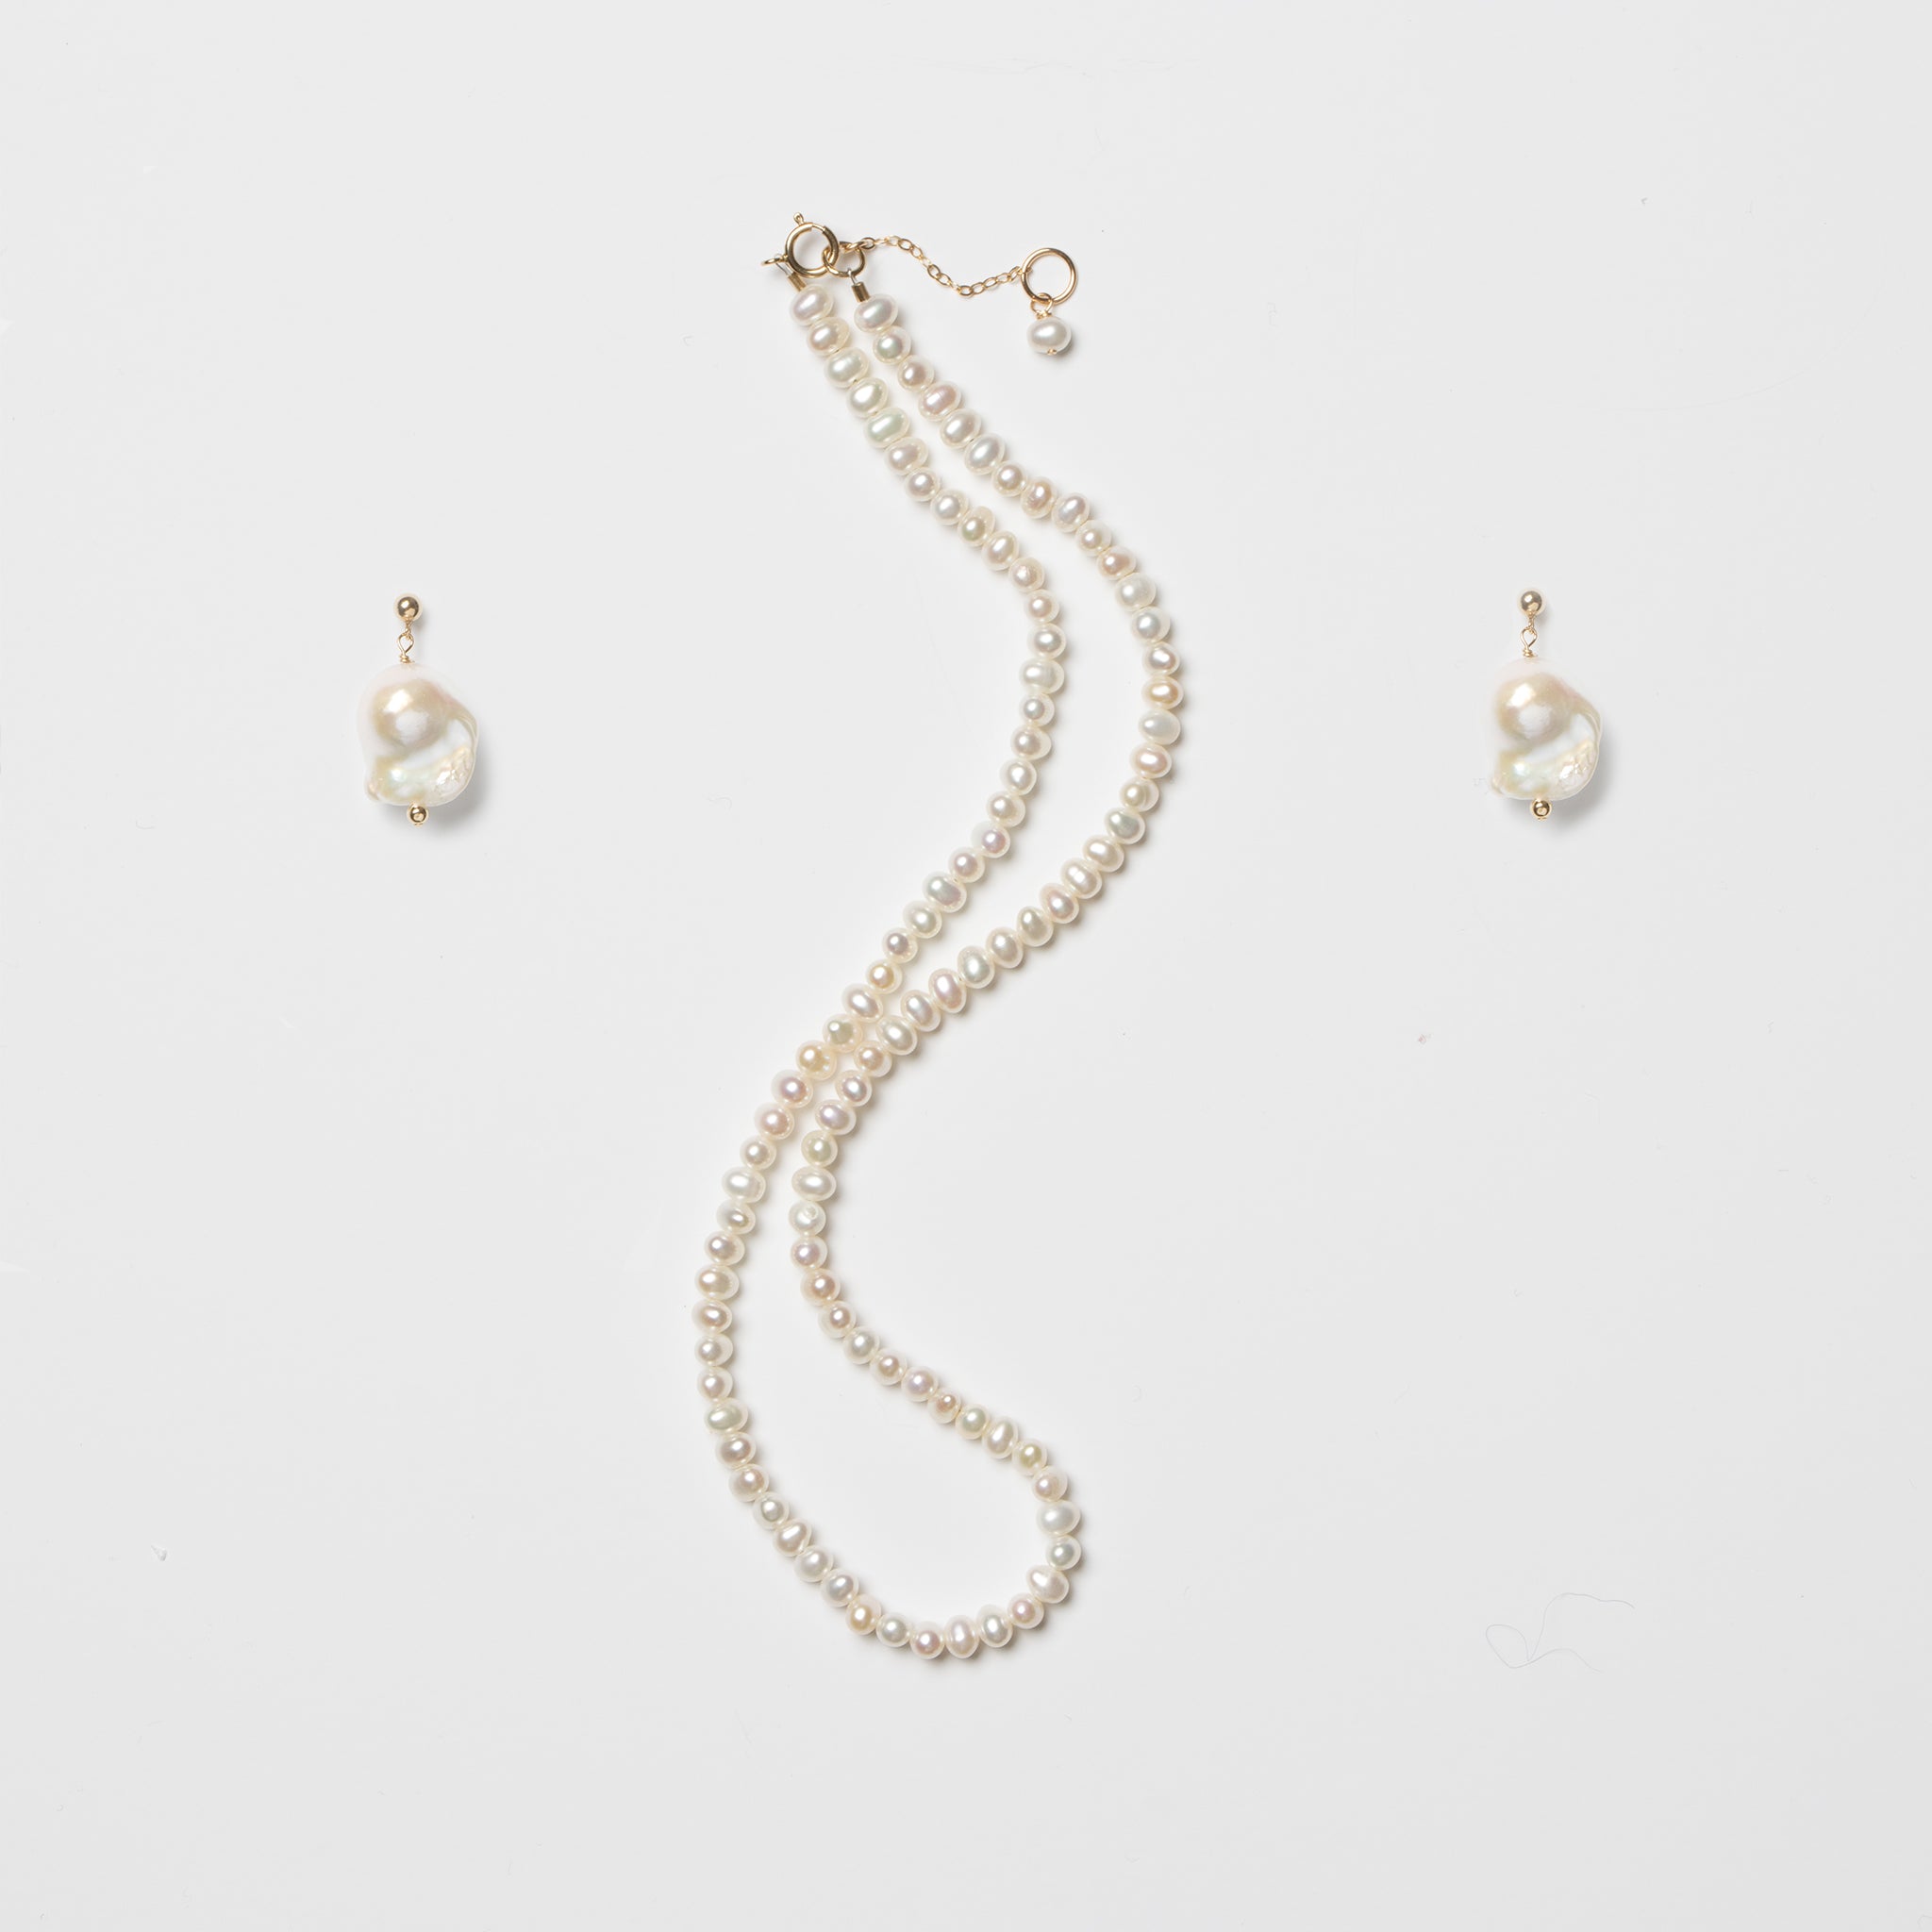 At the Sophisticated Pearl Set